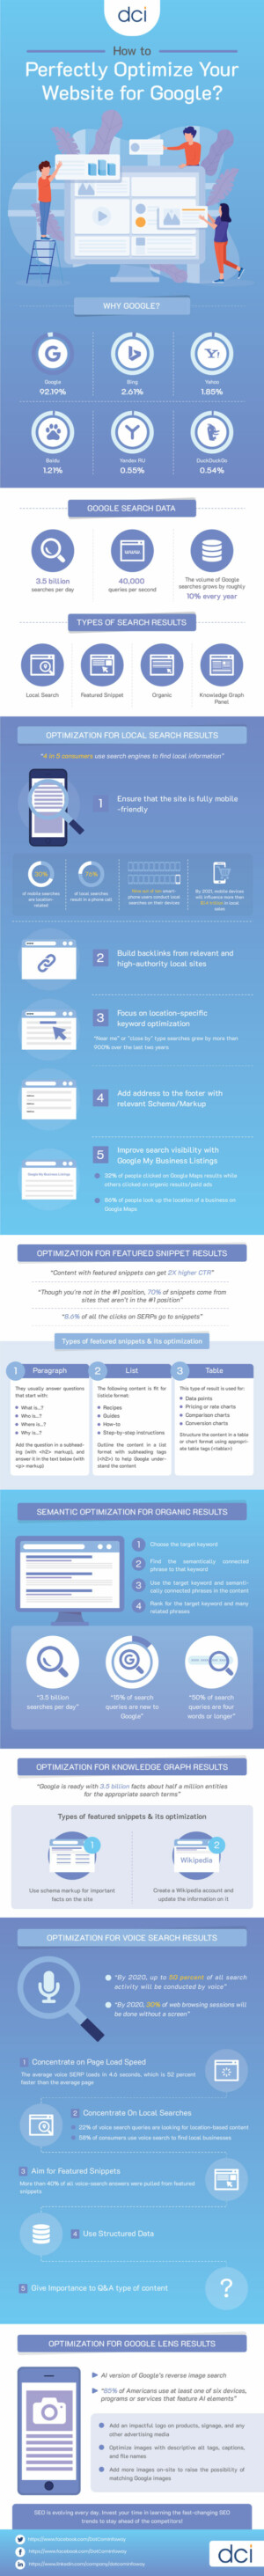 How to Perfectly Optimize Your Website for Google?